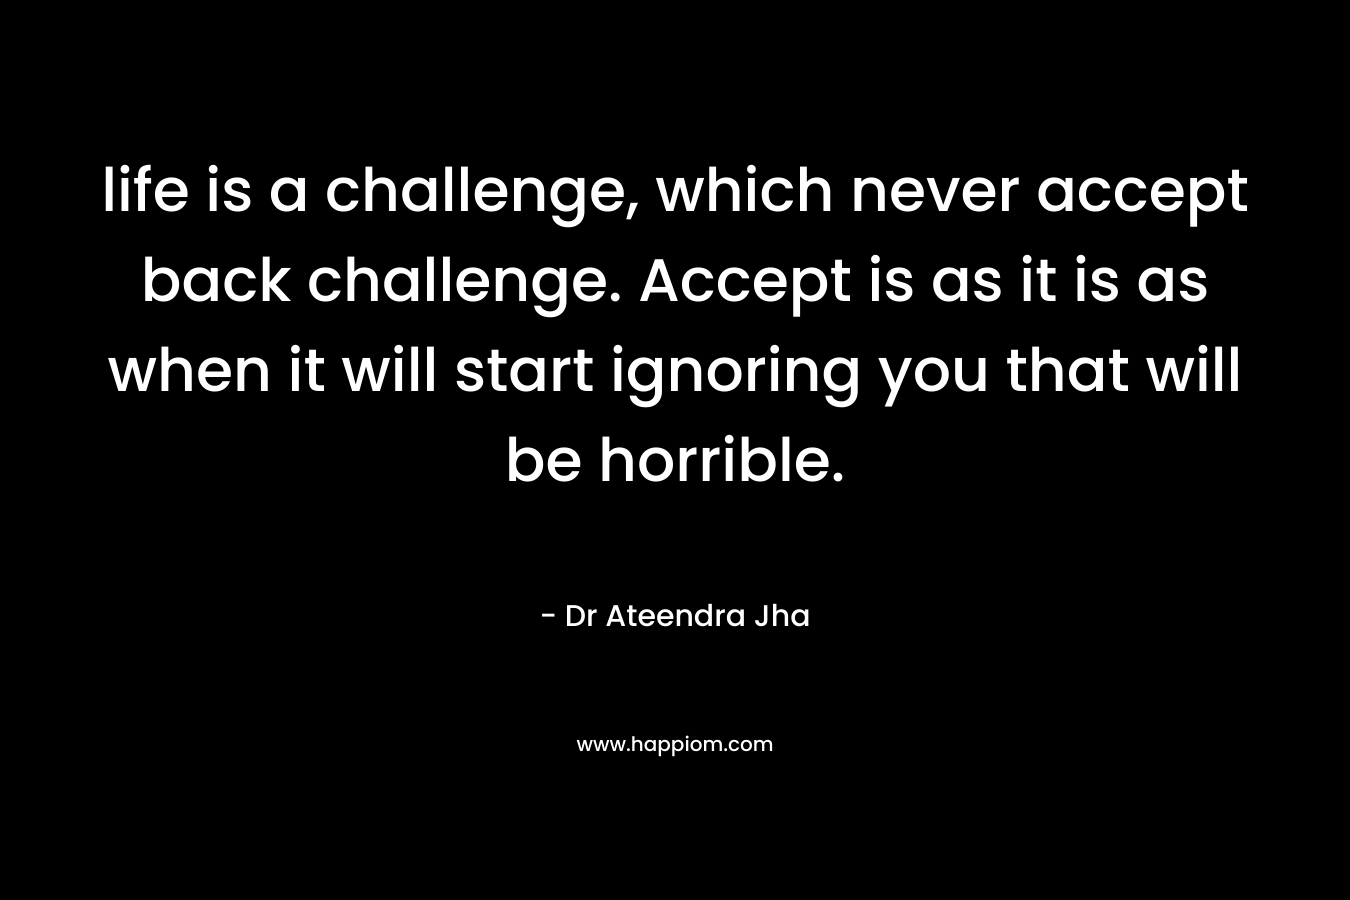 life is a challenge, which never accept back challenge. Accept is as it is as when it will start ignoring you that will be horrible.